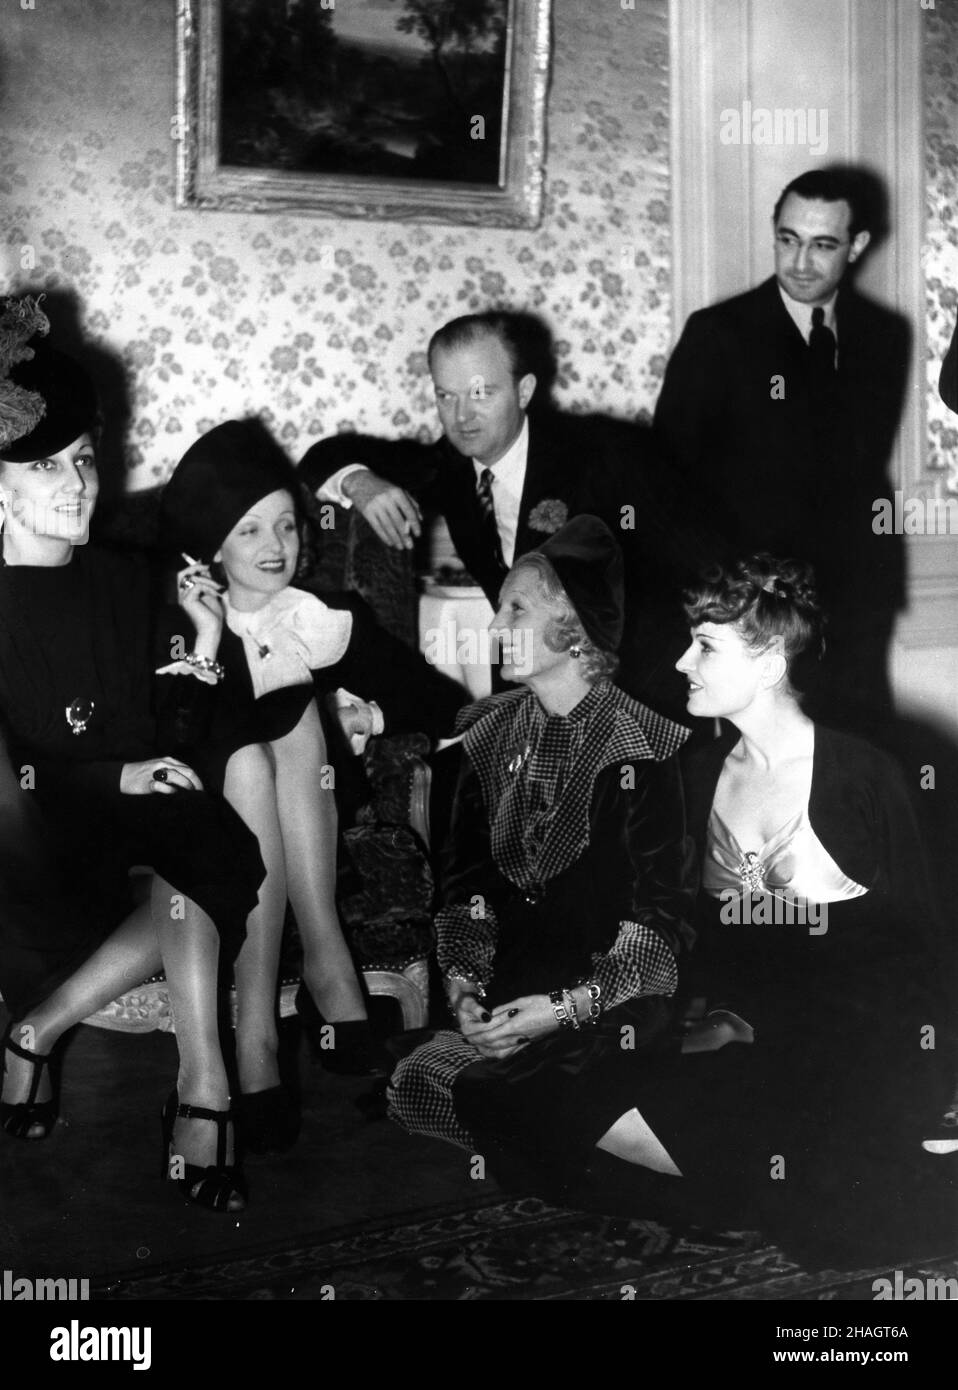 ANN WARNER ( wife of Jack L. Warner) MARLENE DIETRICH ANDERSON LAWLER VERA MATZOUKI and host LILI DAMITA at a Cocktail Party at the Hotel Plaza Athenee in Paris in November 1938 Stock Photo